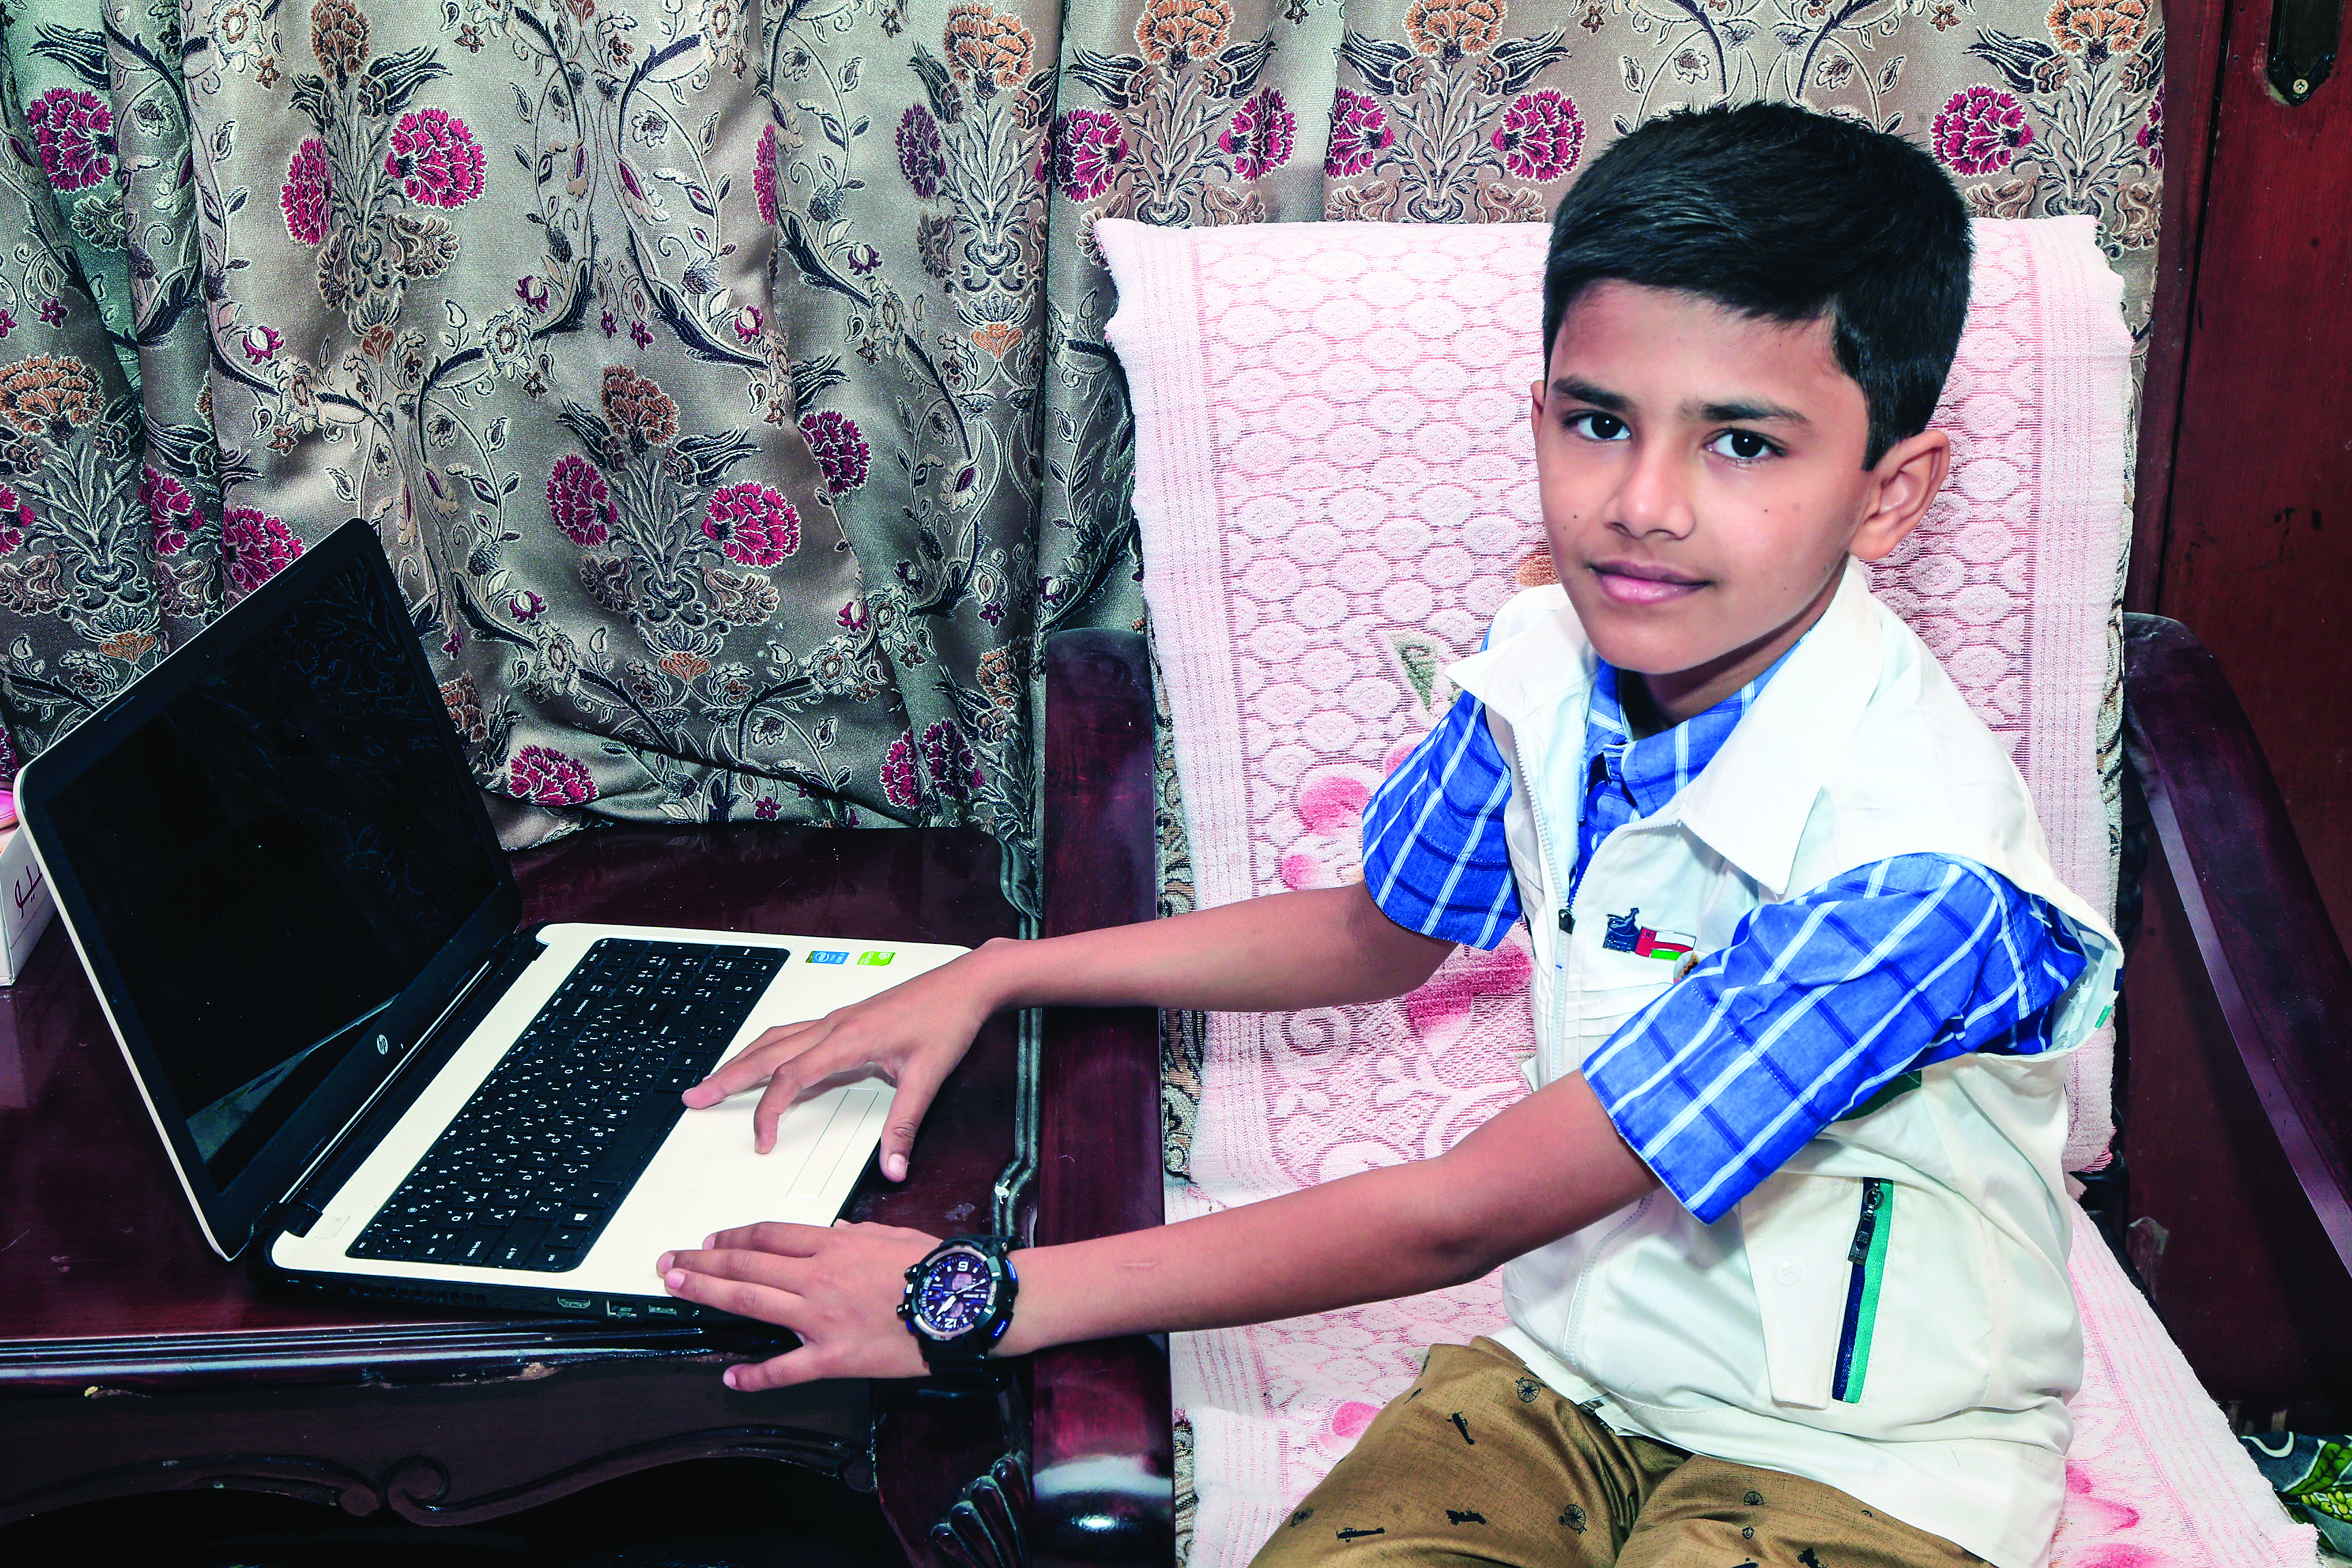 Indian School Wadi Kabir student is the lucky winner of ‘I Love the Sultan’ campaign